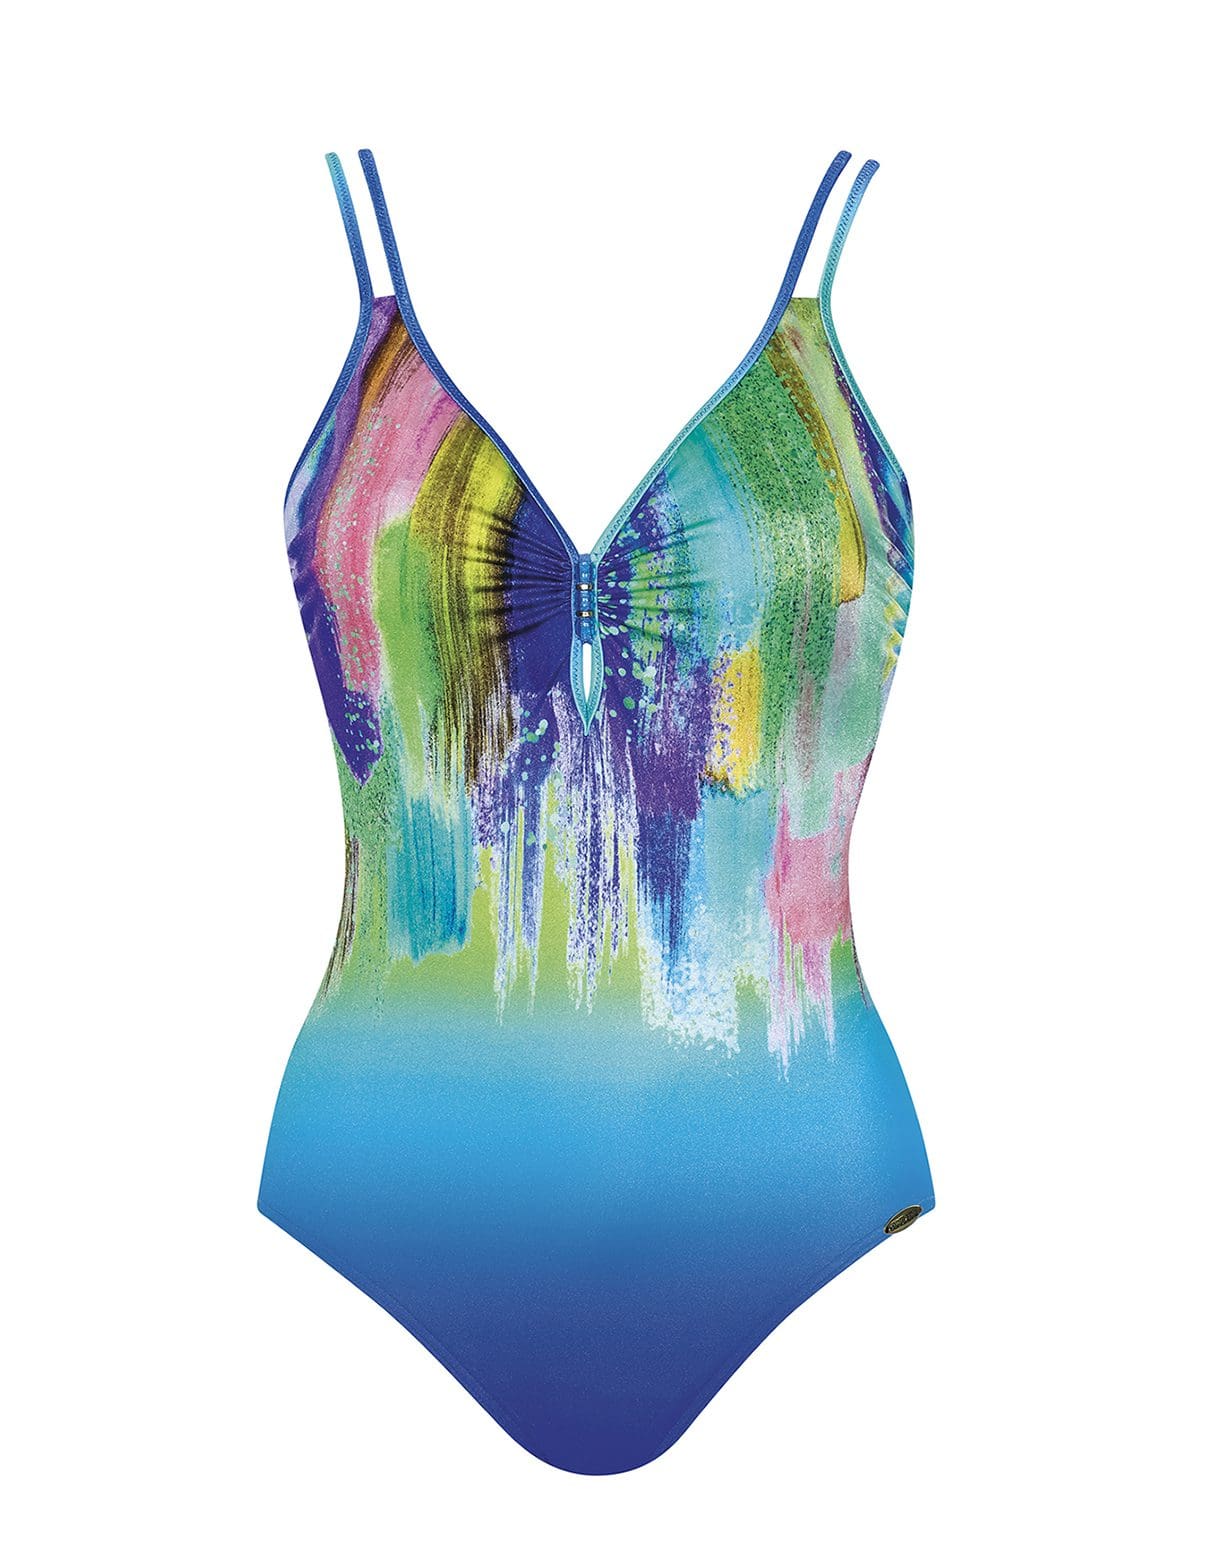 Sunflair Blue Charm V-Neck Swimsuit from Sunflair